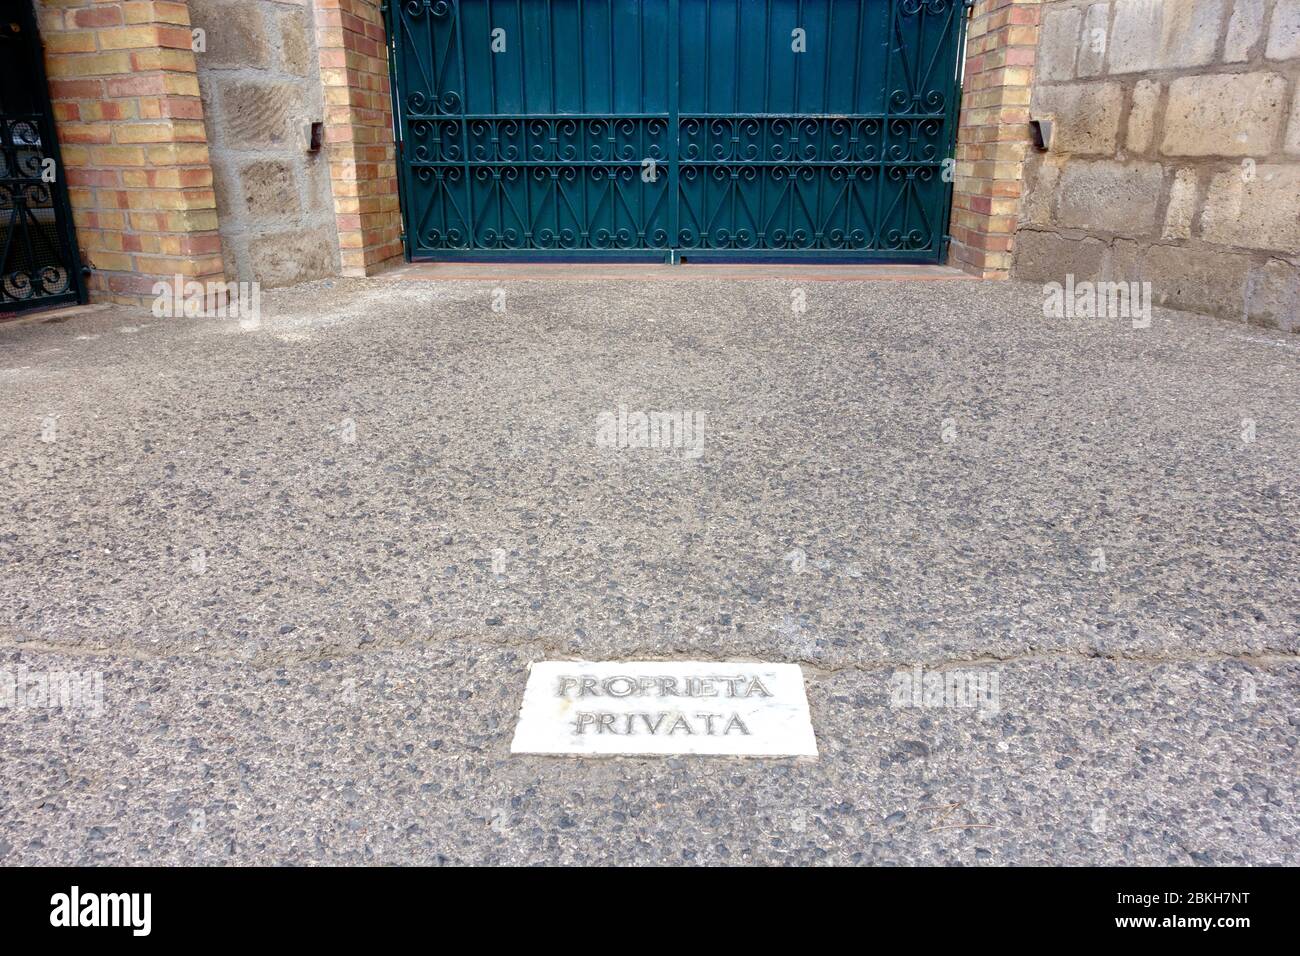 Private Property No Entrance sign in Italian language Stock Photo